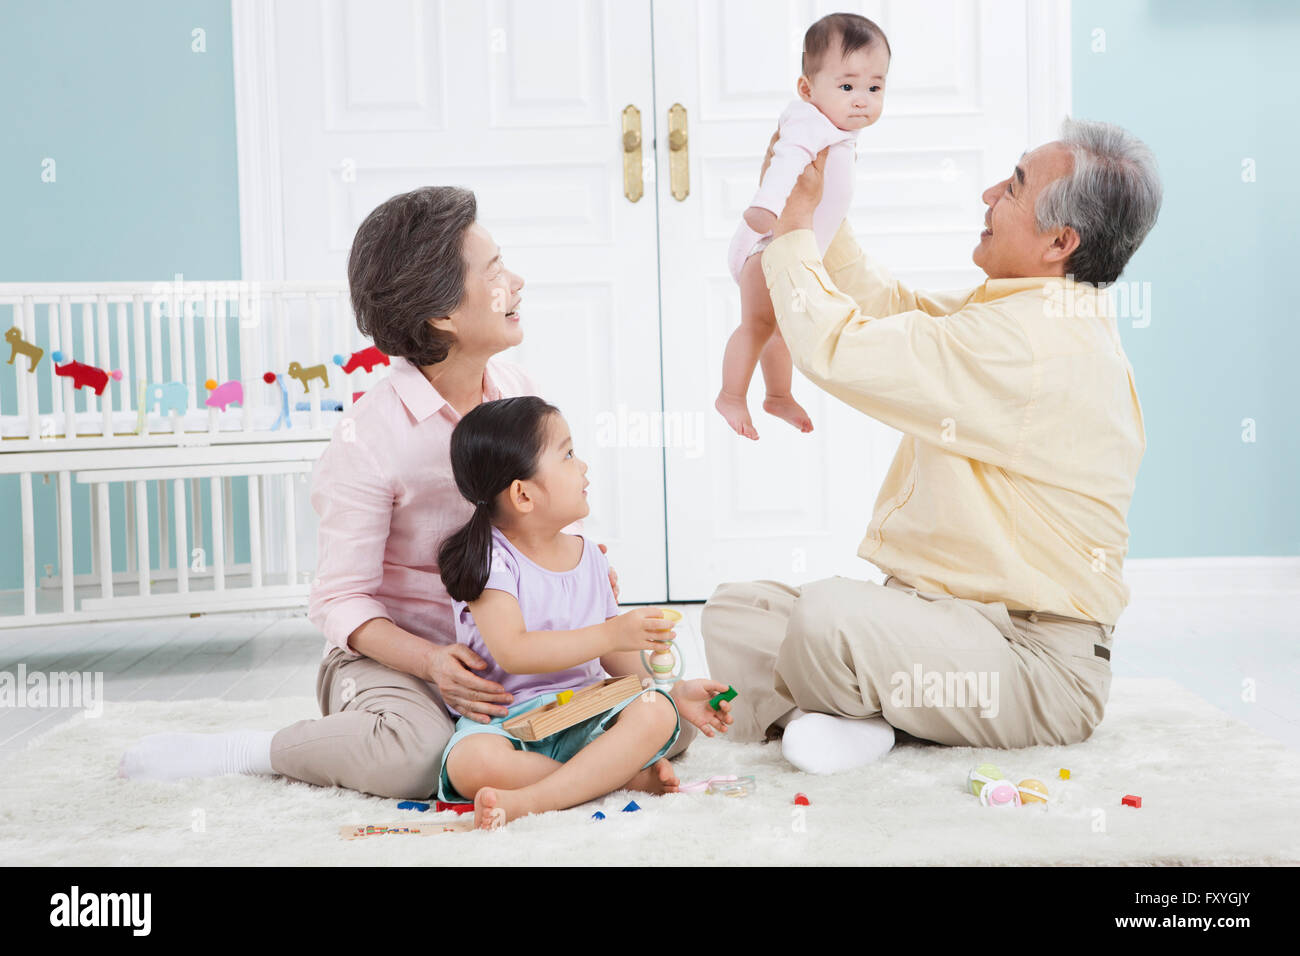 Grandfather holding a baby up and grandmother and granddaughter looking at the baby all seated on the floor Stock Photo